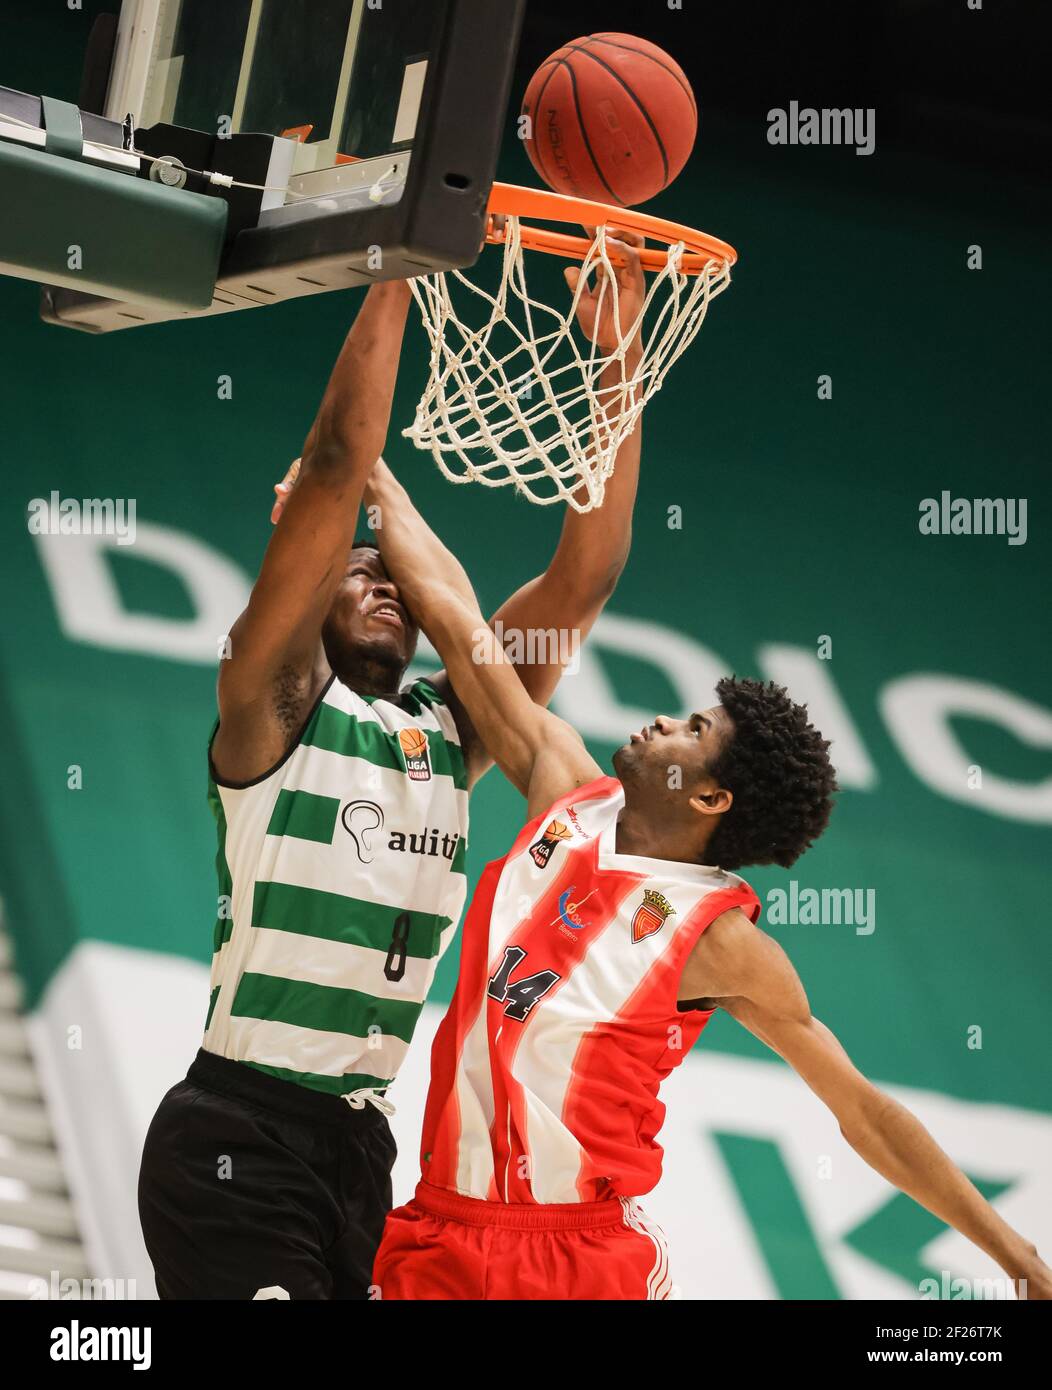 Lisbon, 03/10/2021 - Sporting Clube de Portugal hosted tonight at the João  Rocha pavilion in Lisbon, Futebol Clube Barreirense in the game of the 20th  round of the LPB Placard Basketball 2020/21.